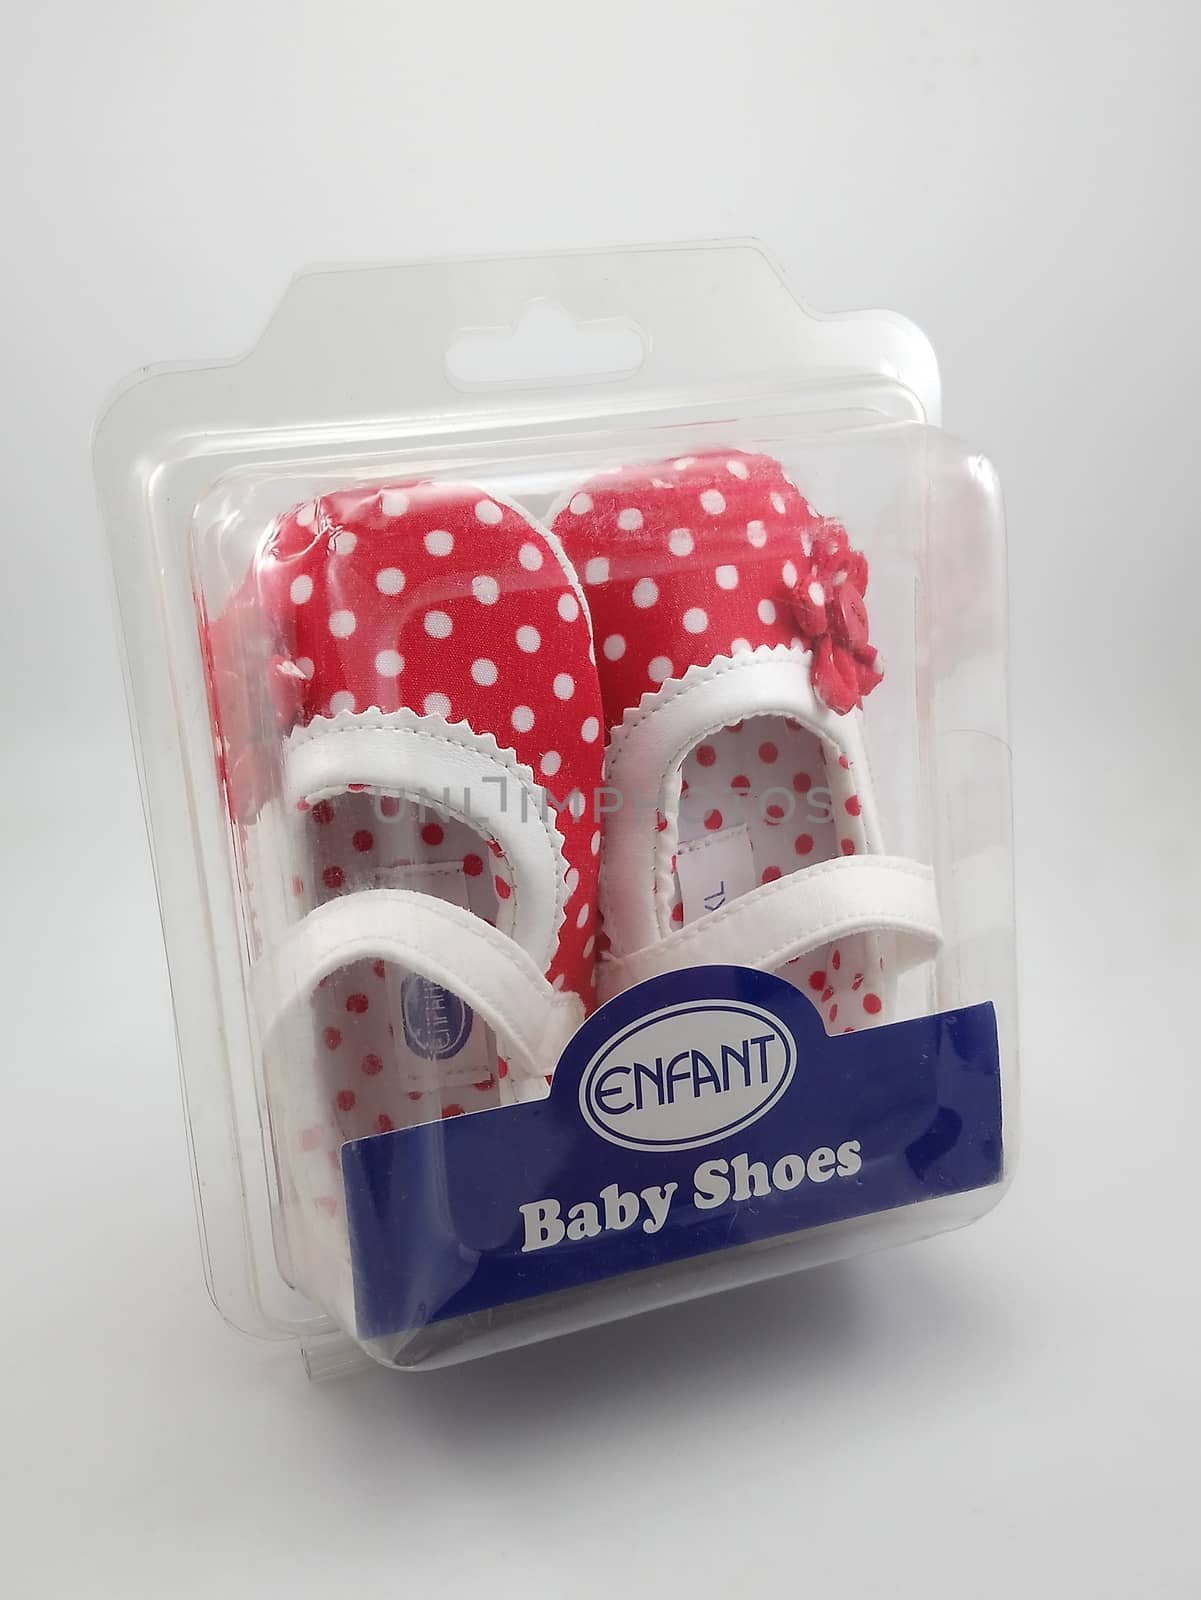 Enfant red polka dots baby shoes in Manila, Philippines by imwaltersy